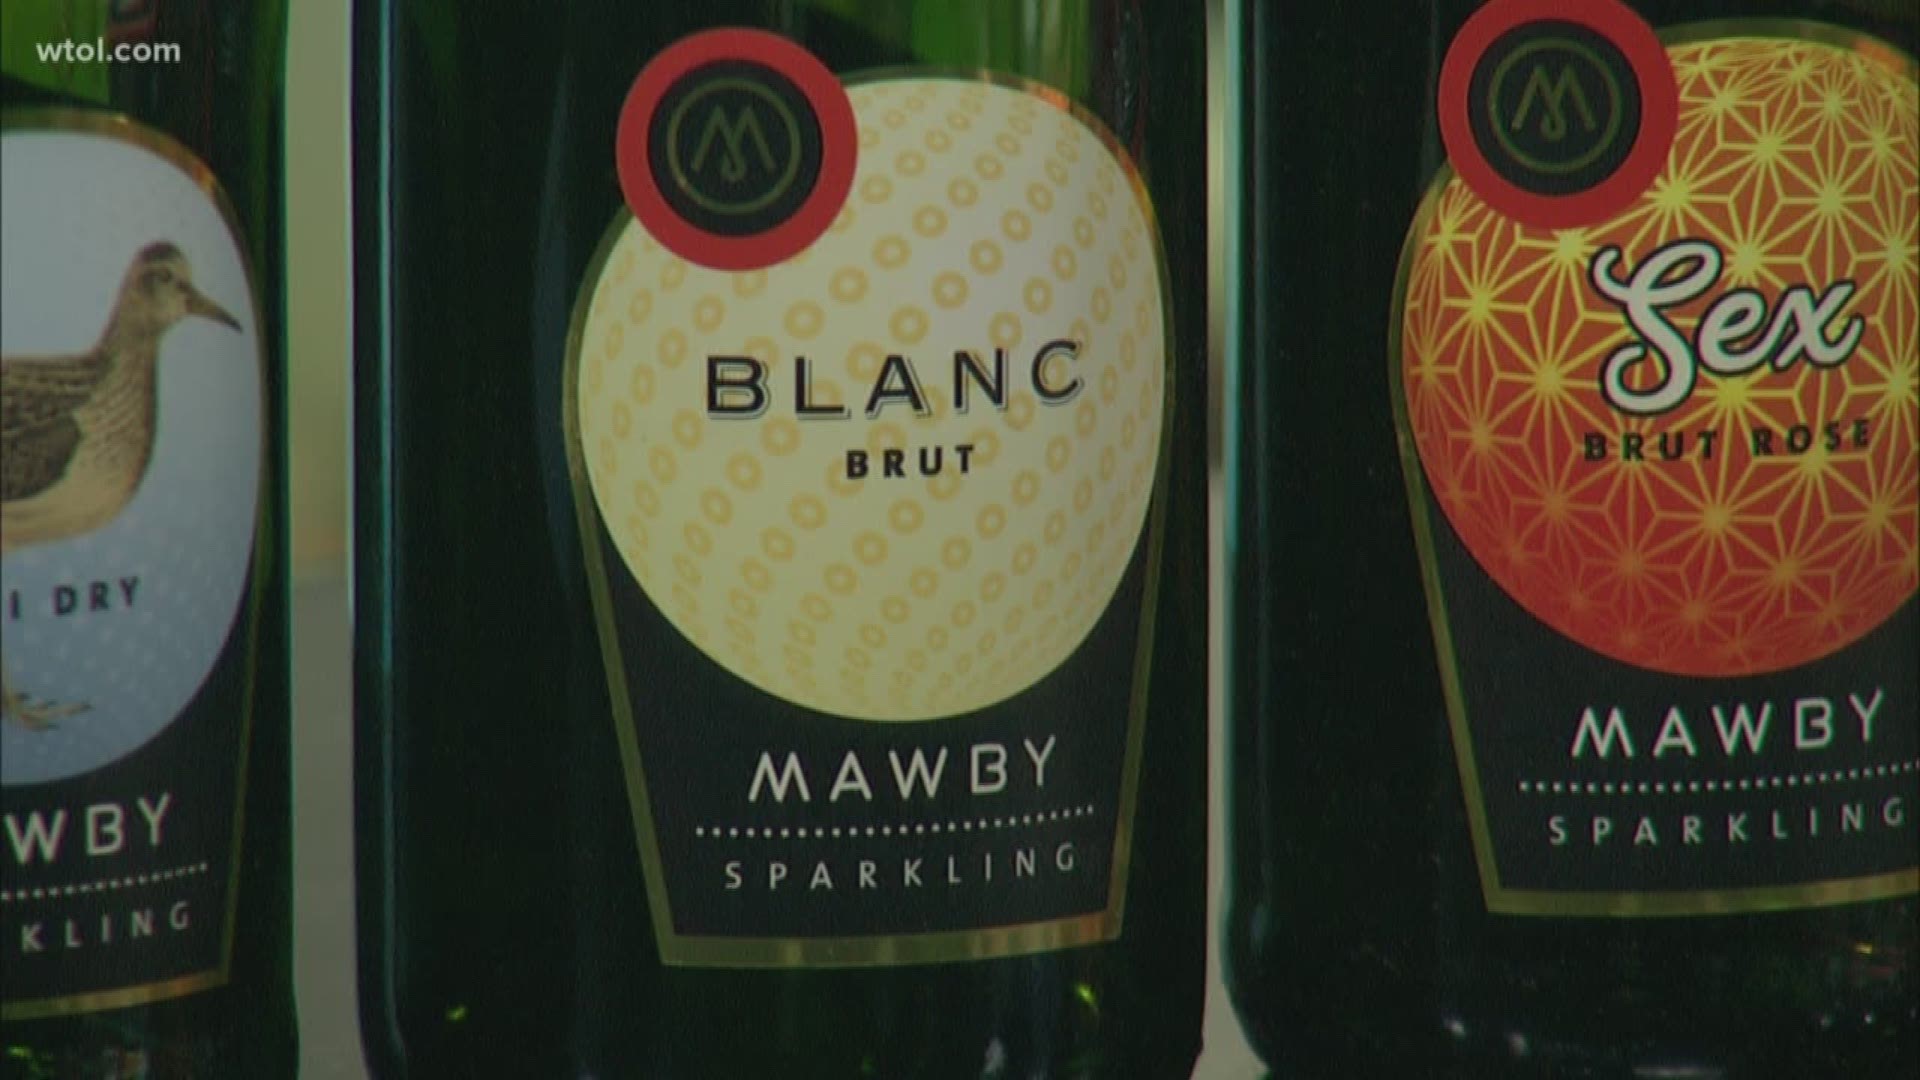 Mawby Sparkling Wine is a new variety headed to the Toledo market from Michigan. Give it a taste and see what you think tonight at Mancy's!